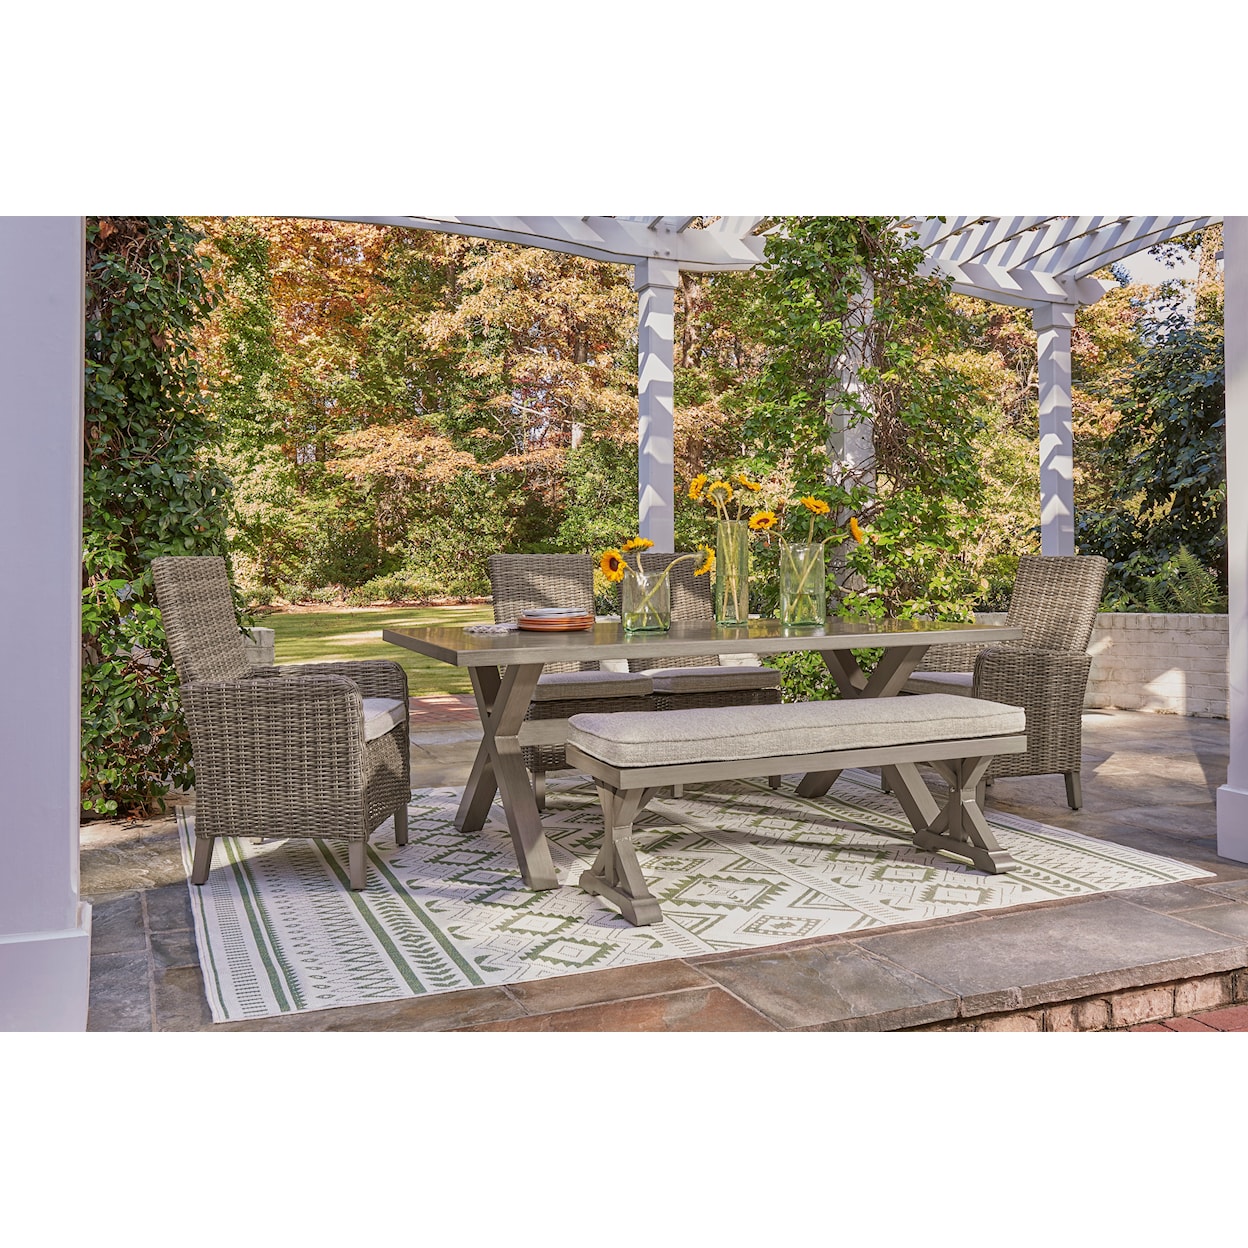 Signature Beach Front 6-Piece Outdoor Dining Set with Bench